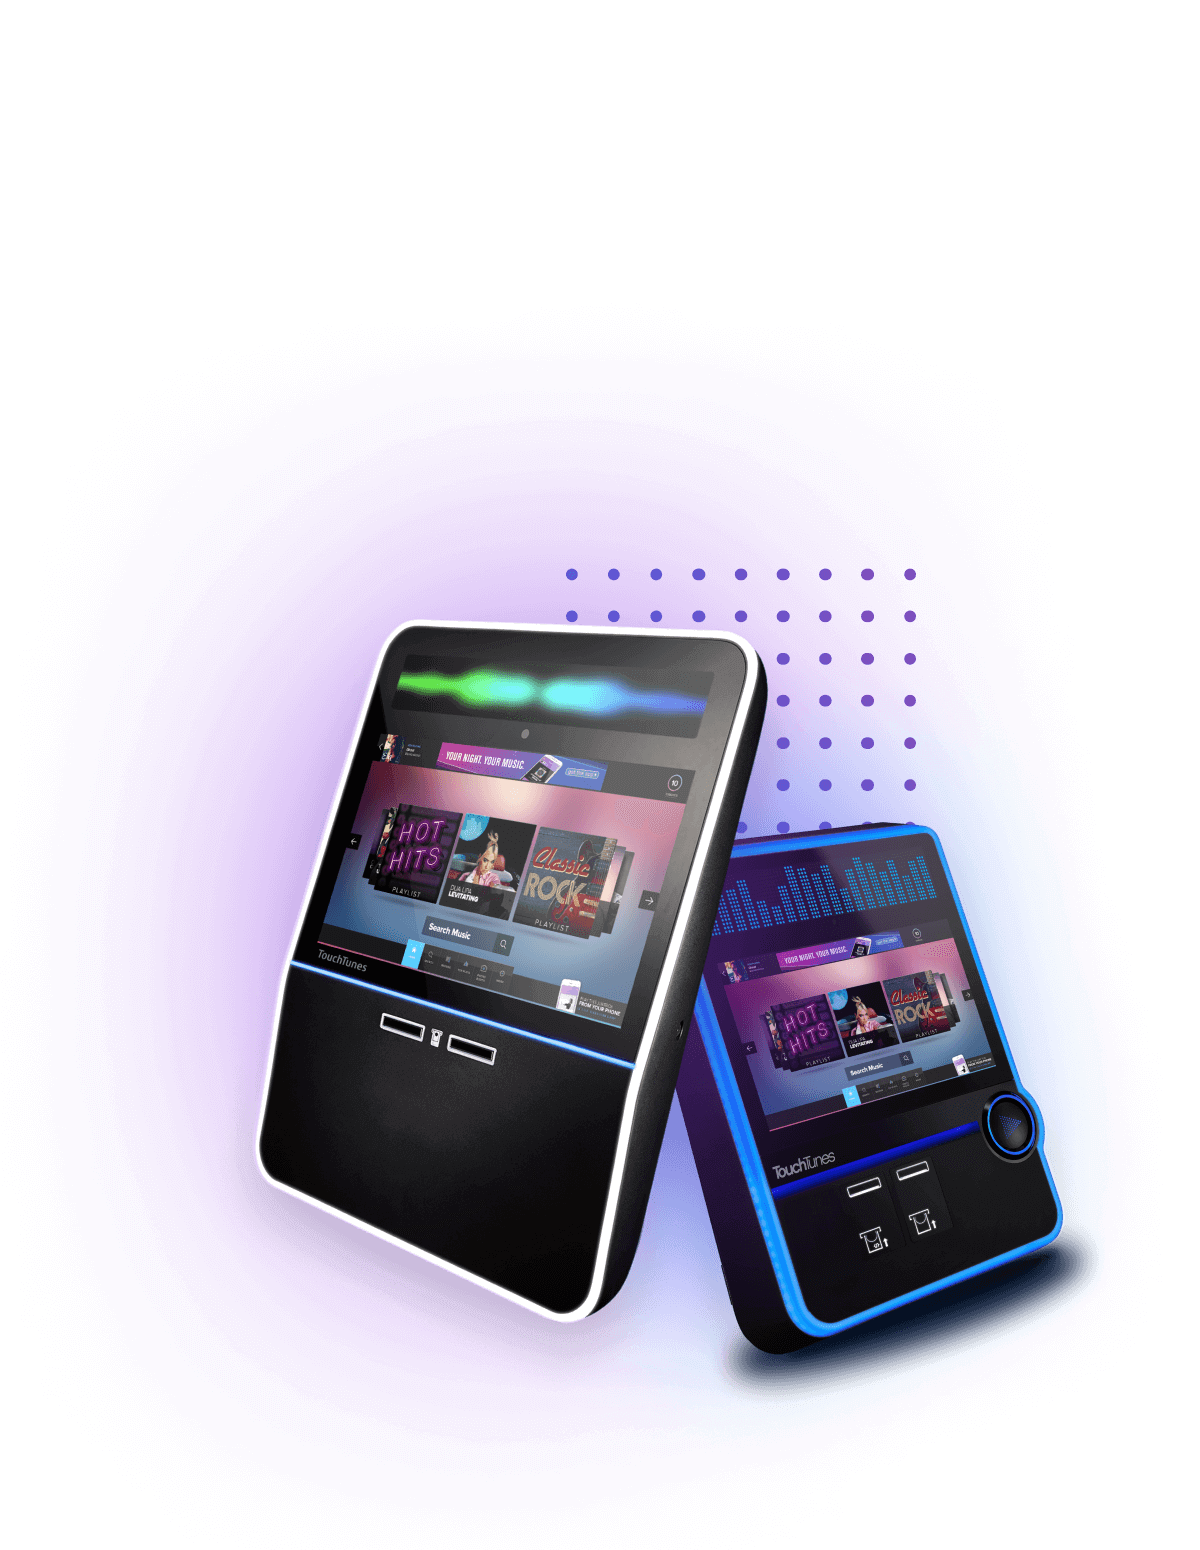 Experience TouchTunes TouchTunes